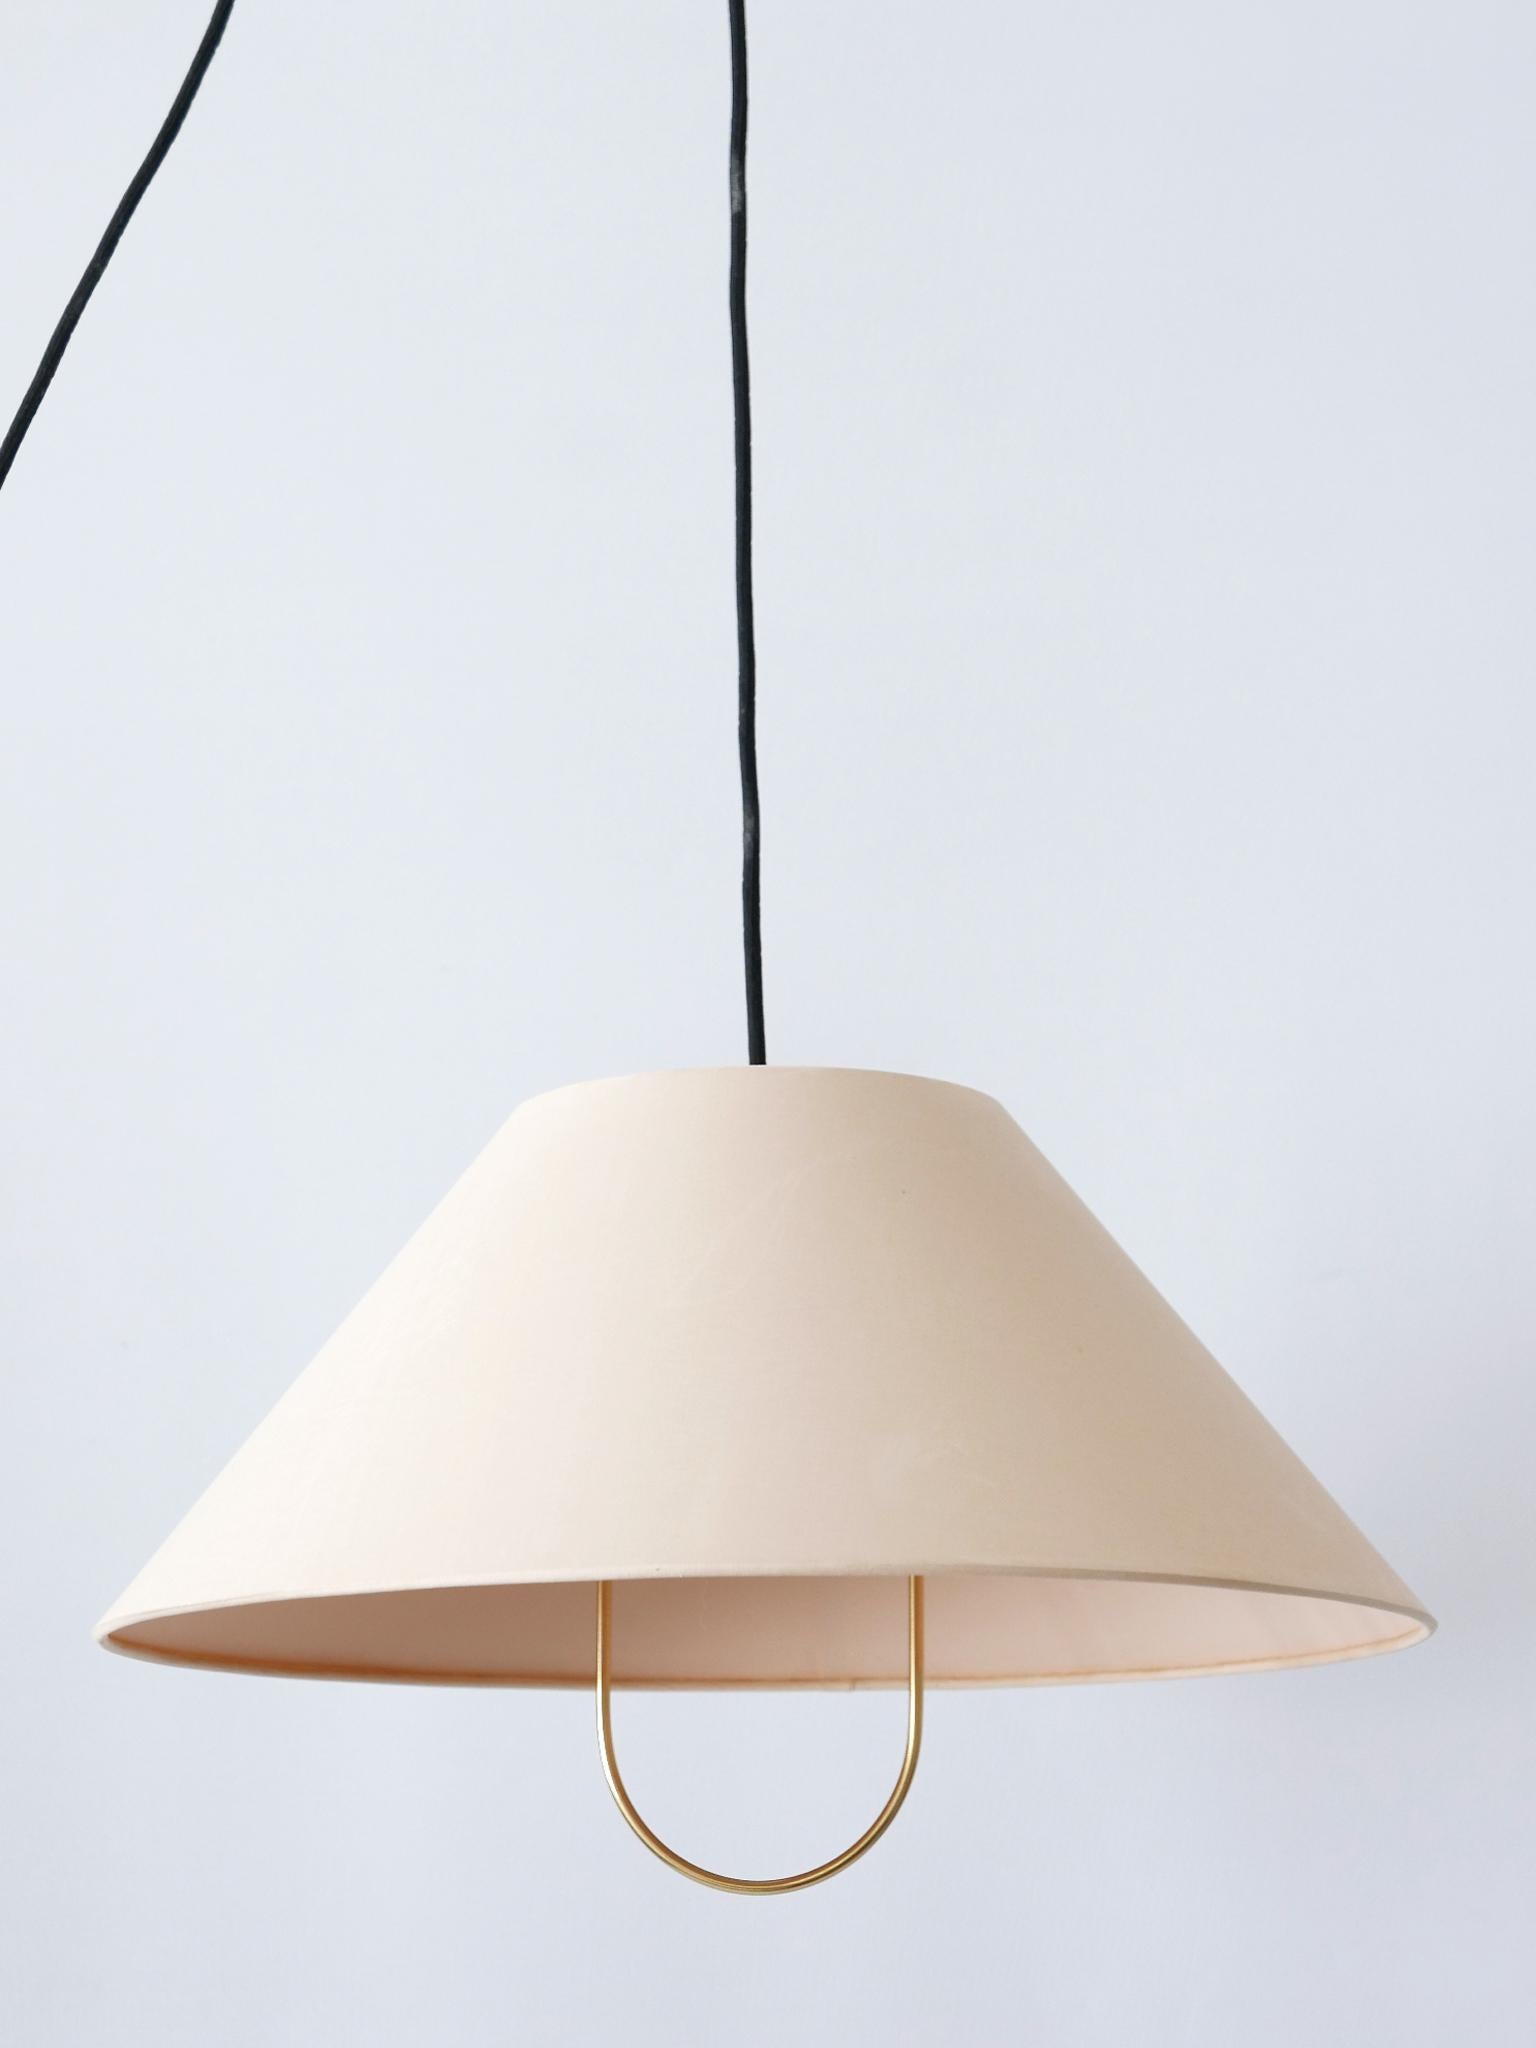 Mid-20th Century Early, Rare & Elegant Counterweight Pendant Lamp by Florian Schulz Germany 1960s